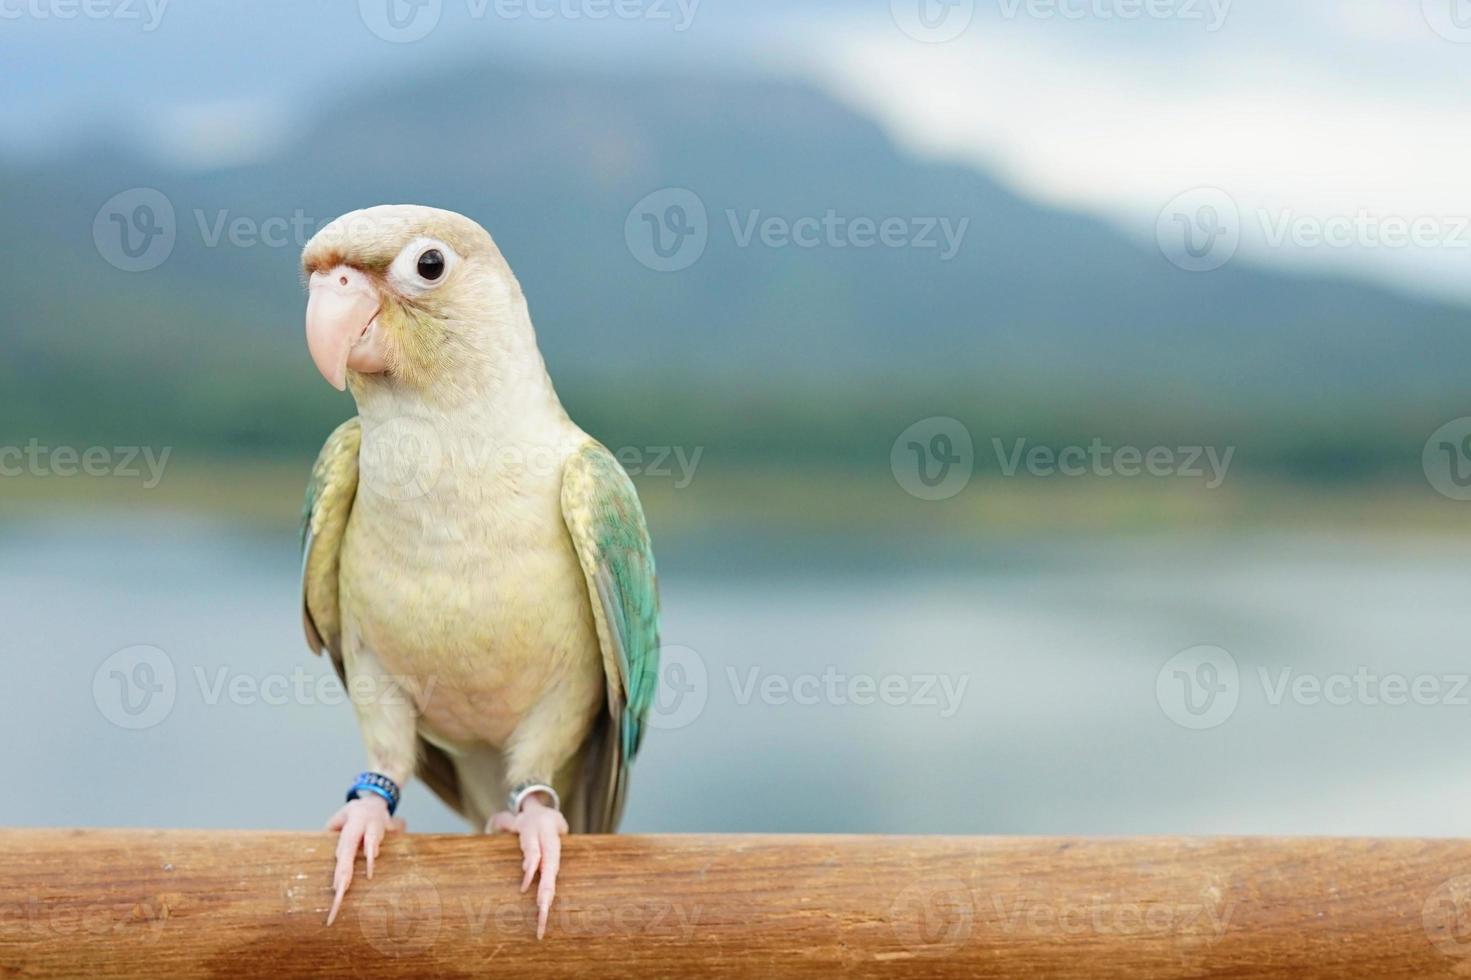 Green cheek conure turquoise pineapple turquoise cinnamon and opaline mutations color on the sky and mountain background, the small parrot of the genus Pyrrhura, has a sharp beak. photo